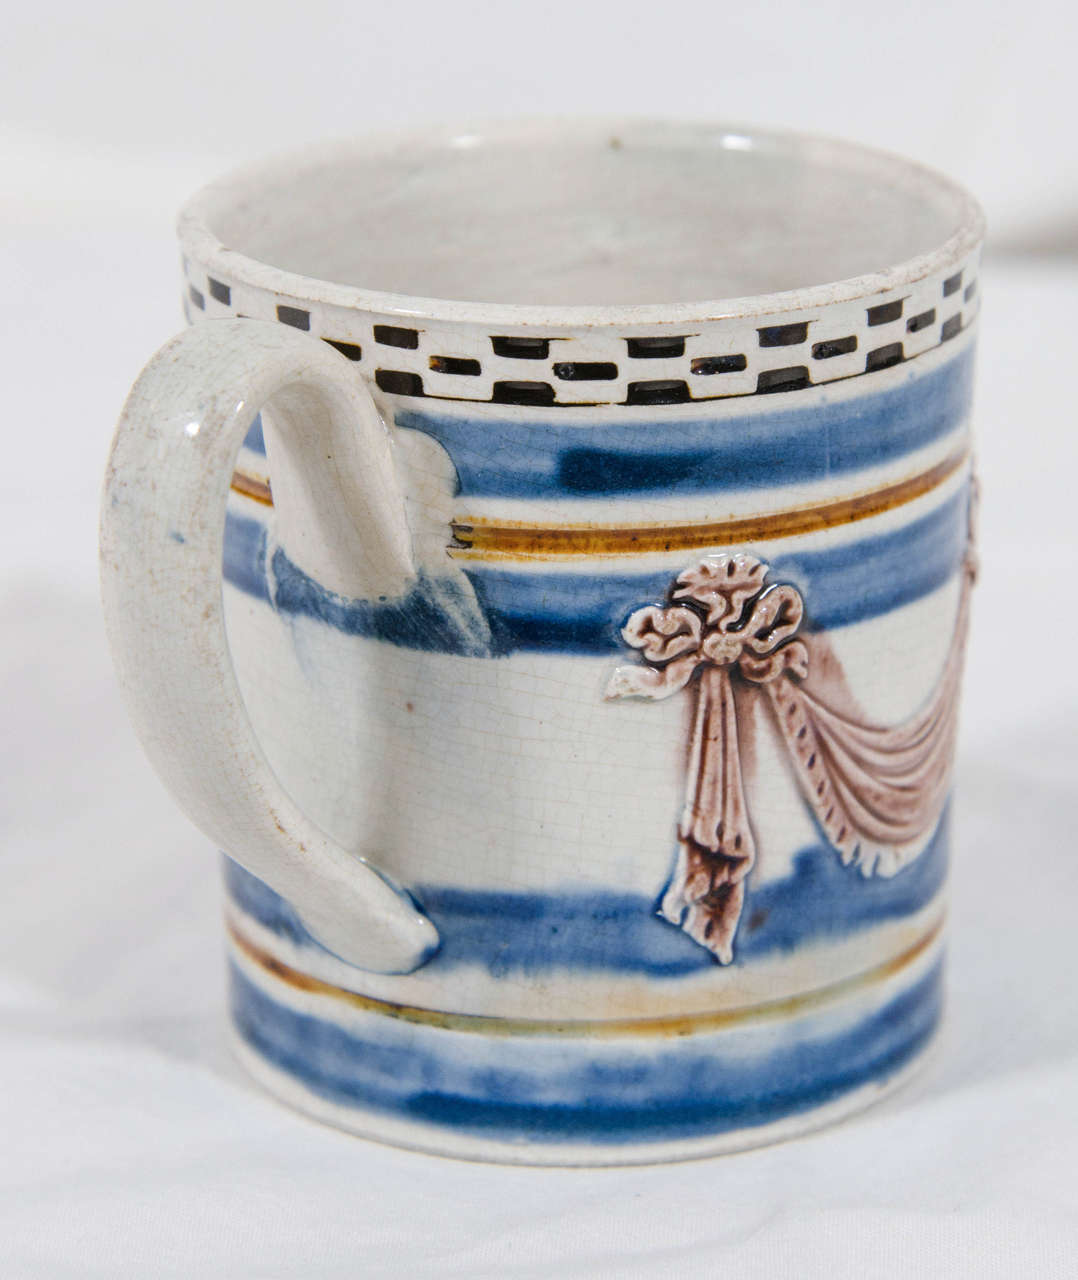 A small creamware mochaware child's mug with a lively design of black and white rouletting, manganese draped swags, and bands of blue and brown.